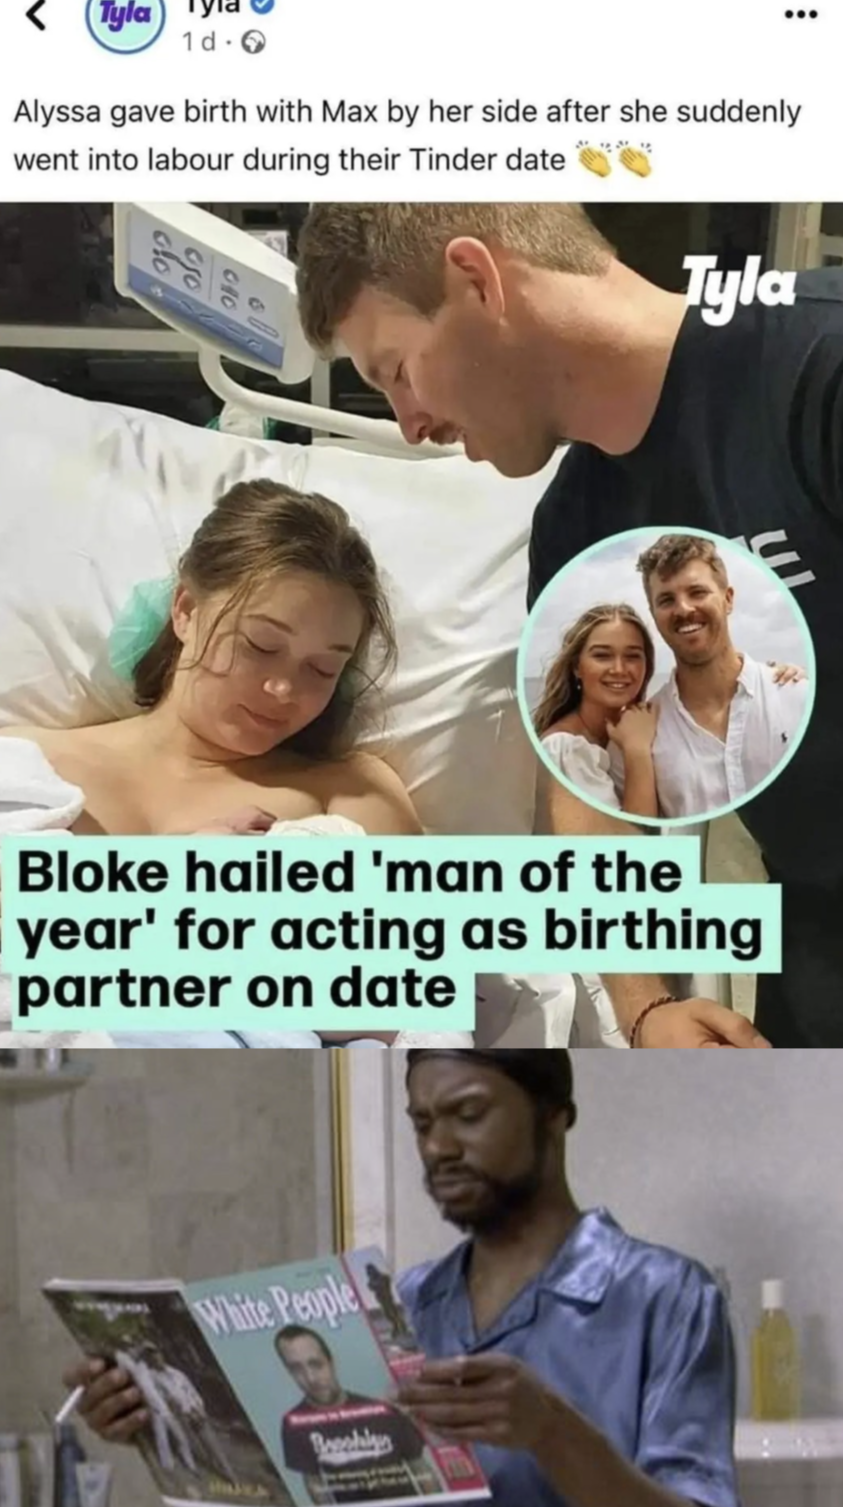 funny memes - photo caption - Tyla 1d0 Alyssa gave birth with Max by her side after she suddenly went into labour during their Tinder date Bloke hailed 'man of the year' for acting as birthing partner on date White People Tyla